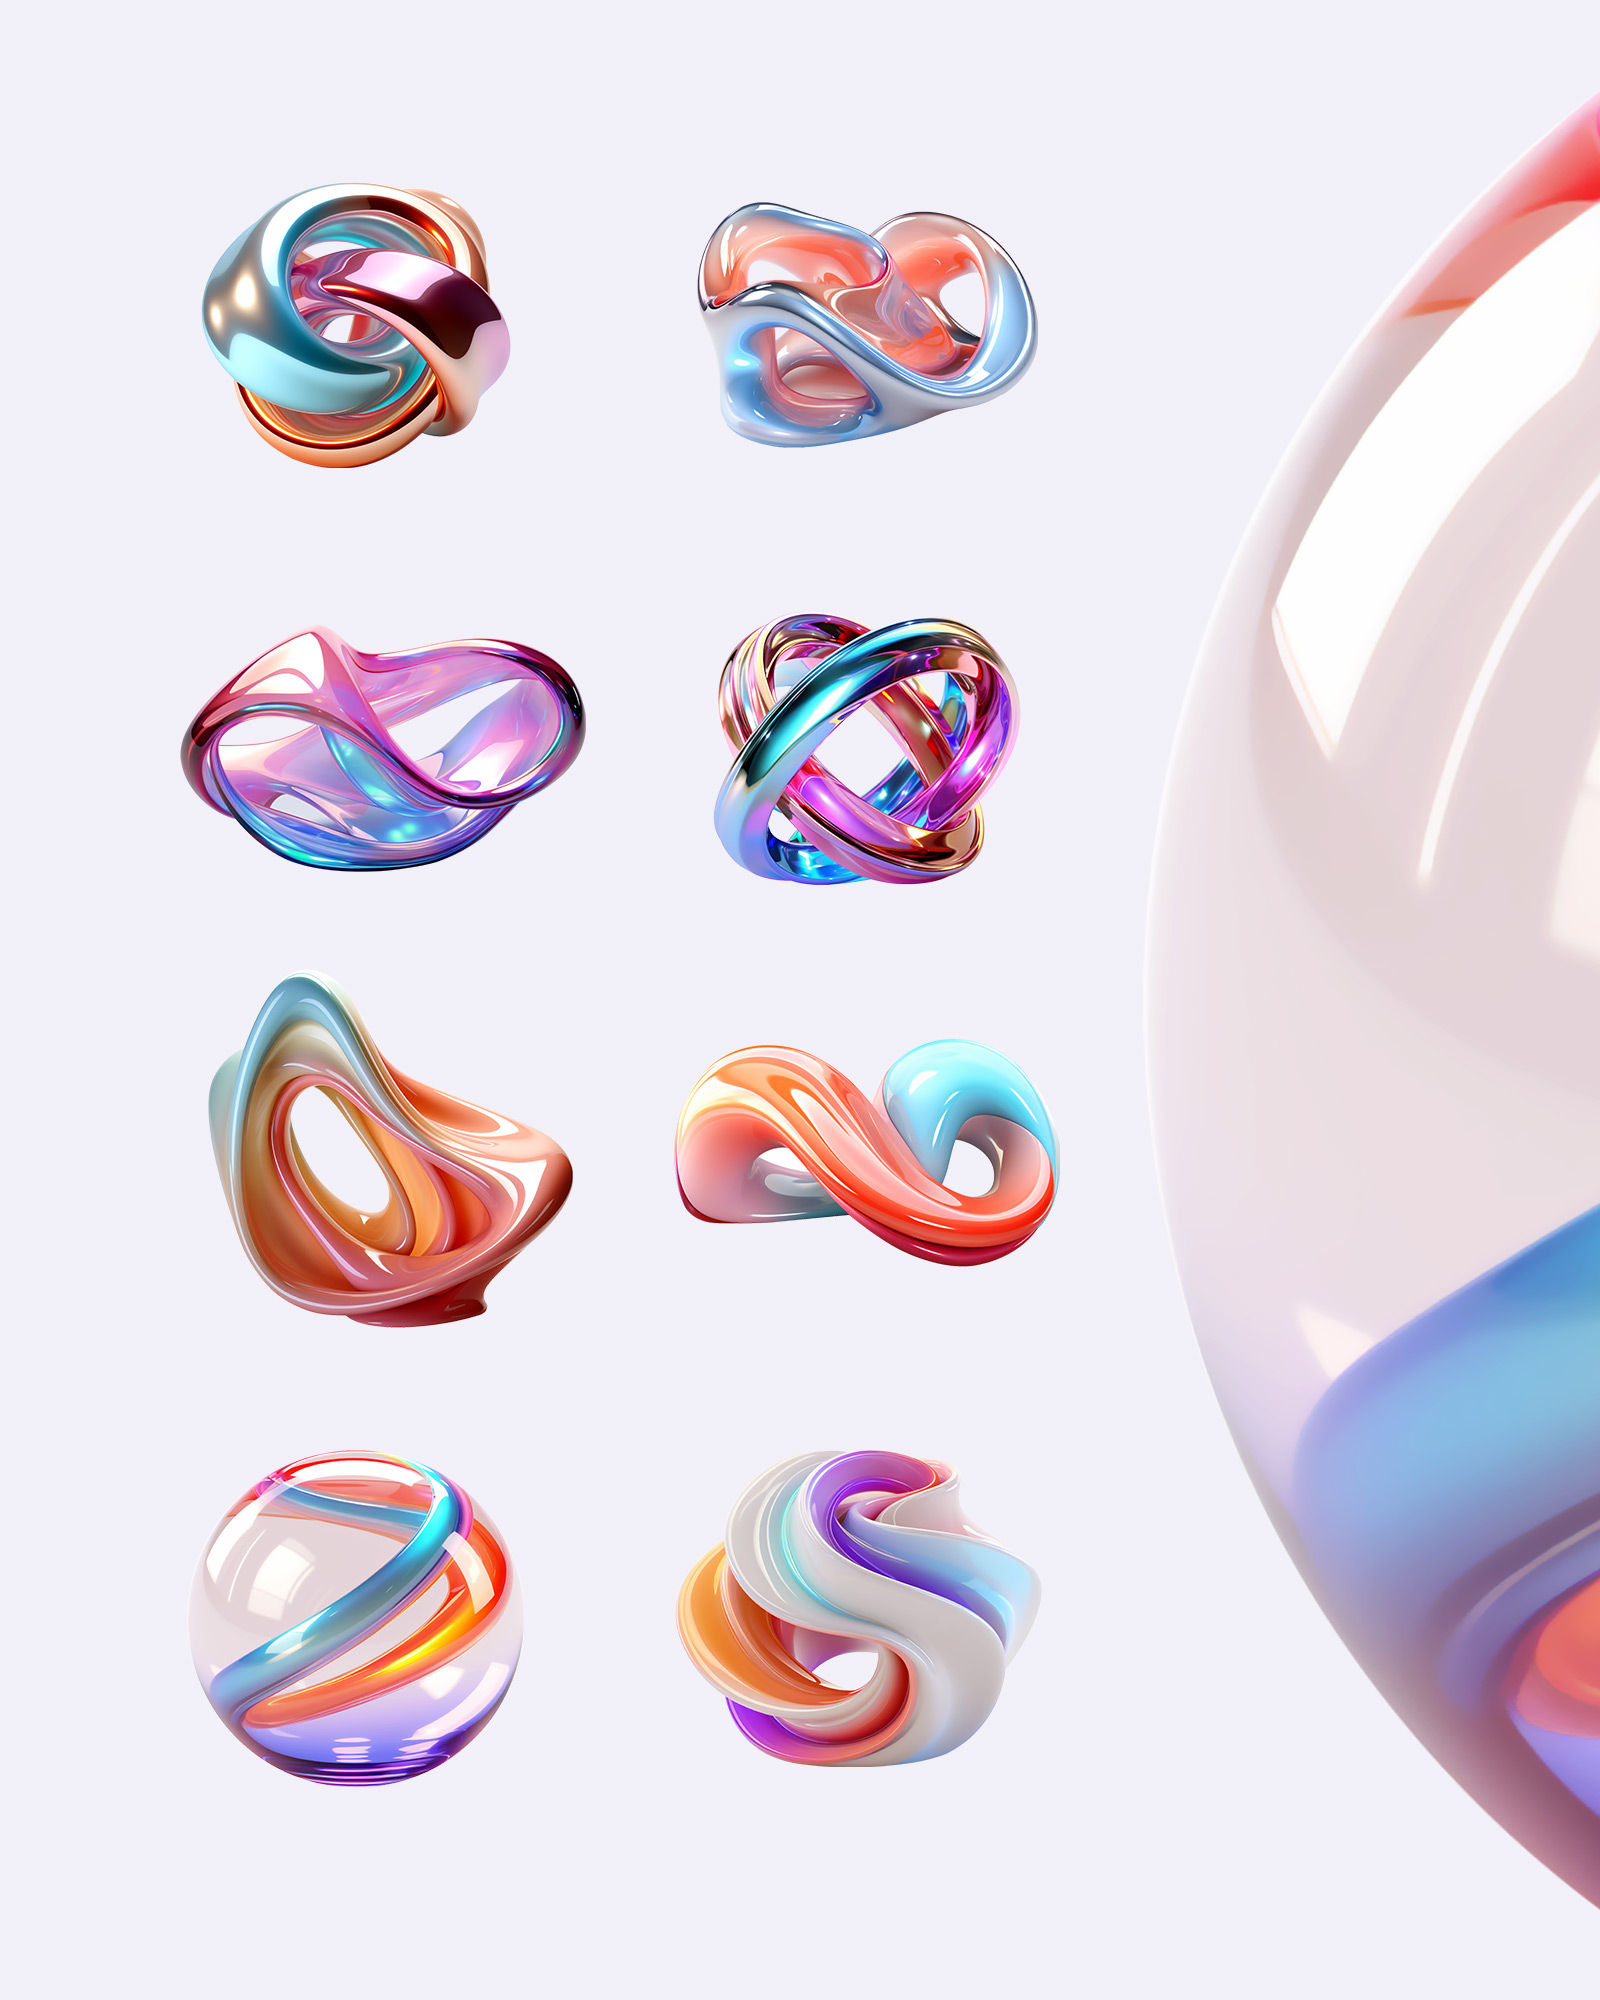 Holographic Abstract Fluid Shapes